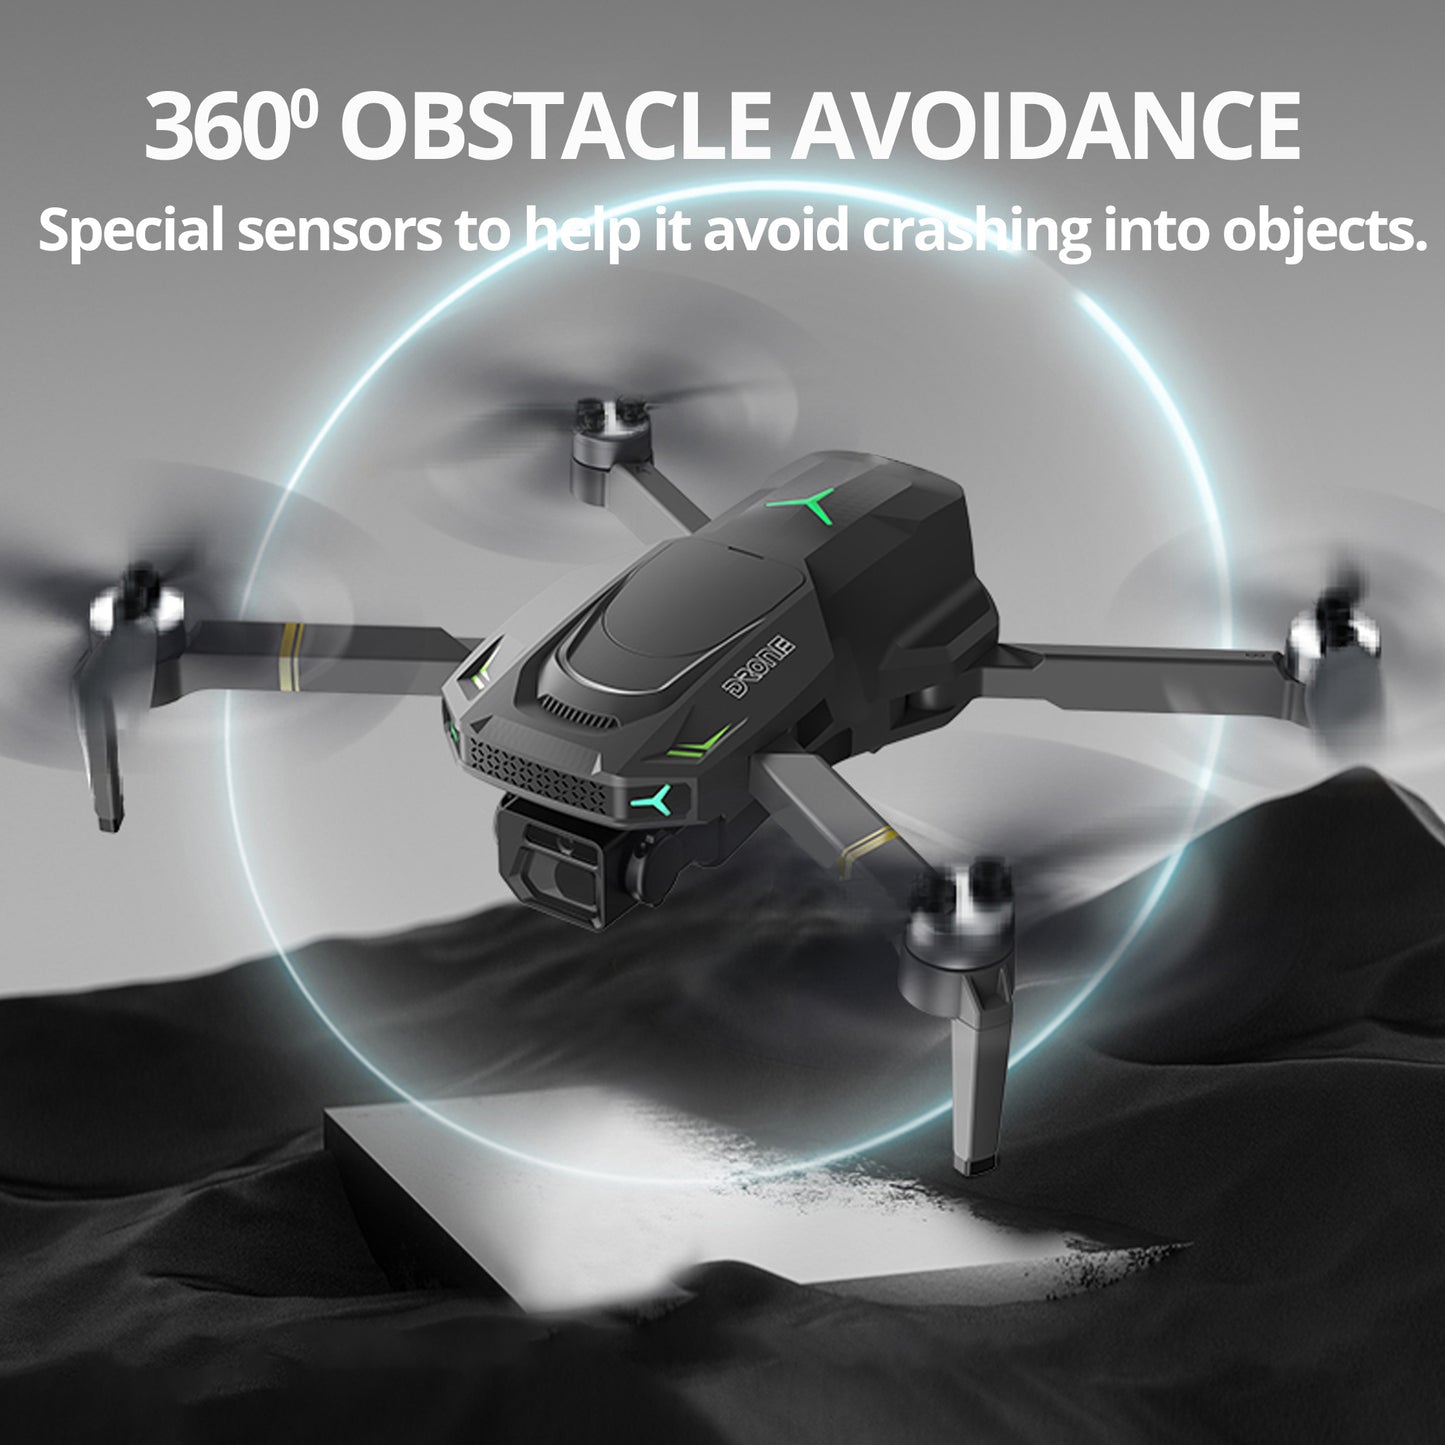 RERFURBISHED: The Bigly Brothers E58 X Lite Mark II Delta Black Superior Edition, FPV Drone with Camera, 360 Degrees of Obstacle Avoidance, Carrying Case plus an additional 2000mAh Battery, Below 249g, Ready to Fly!